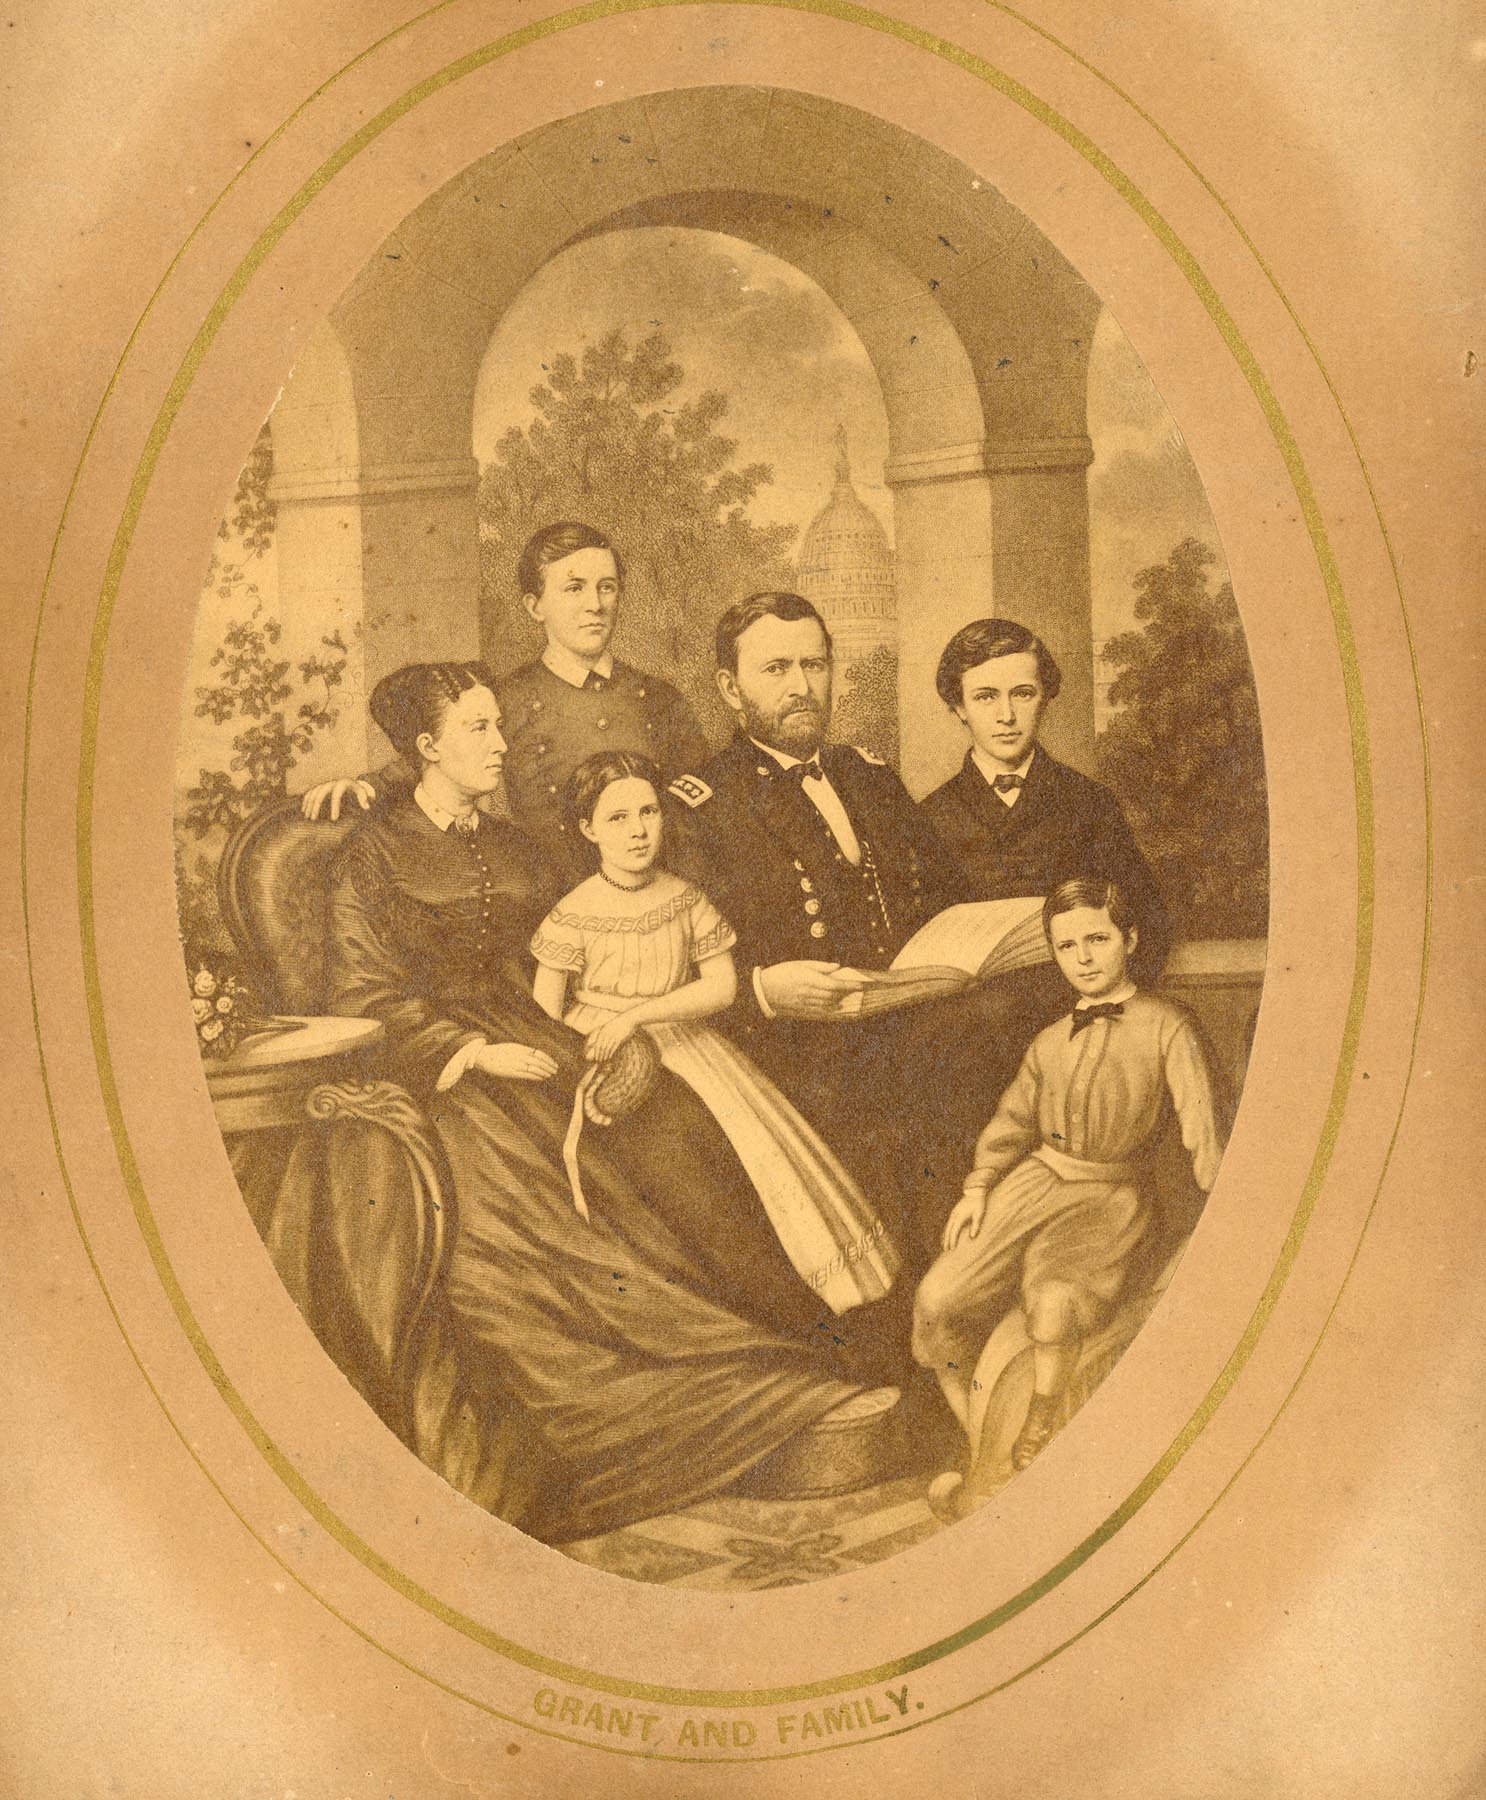 U.S. Grant and Family